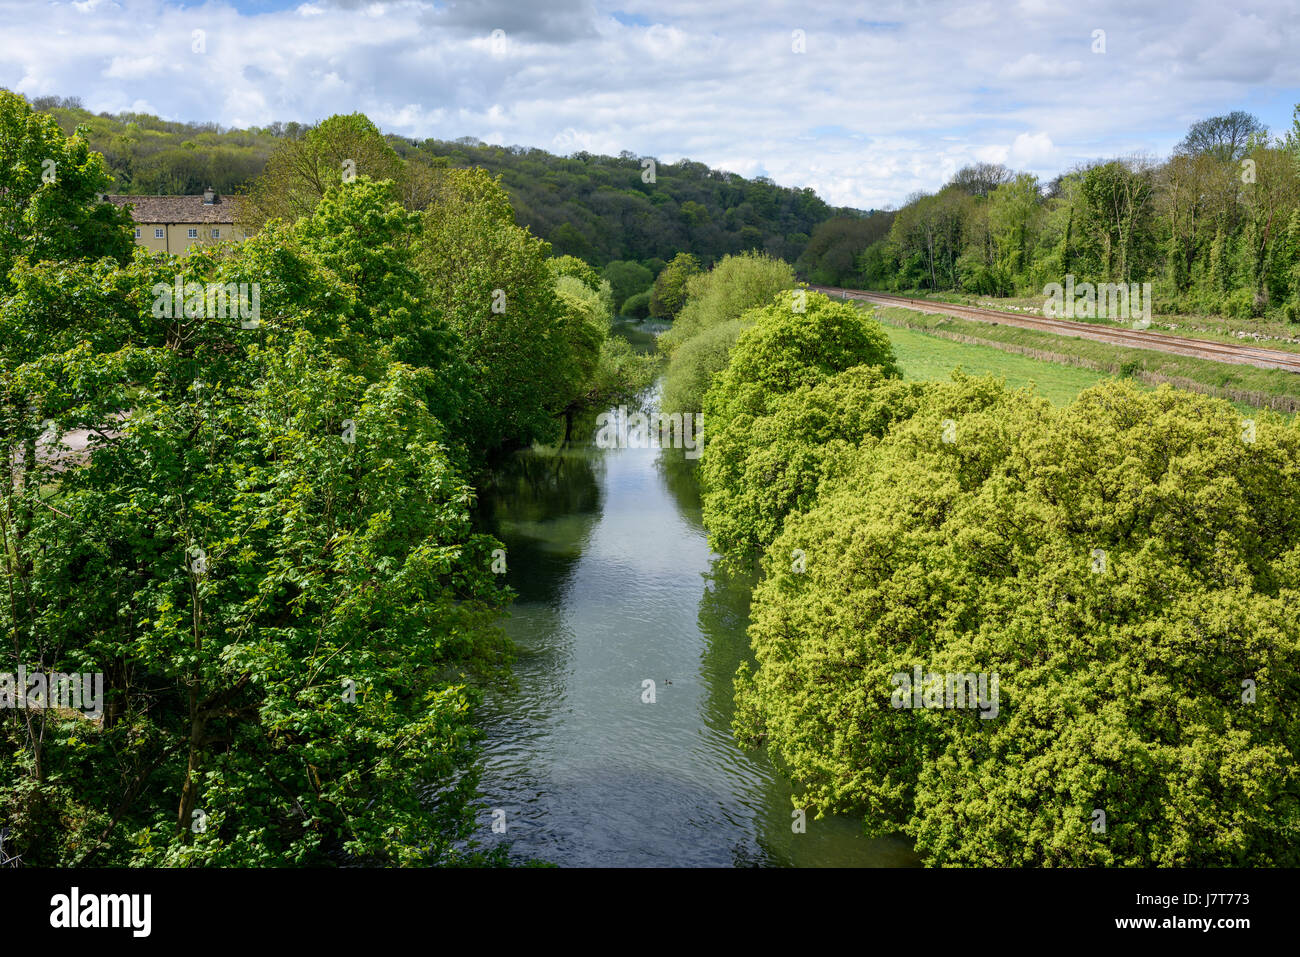 The River Avon viewed from Avoncliff Aqueduct, Wiltshire, England. Stock Photo